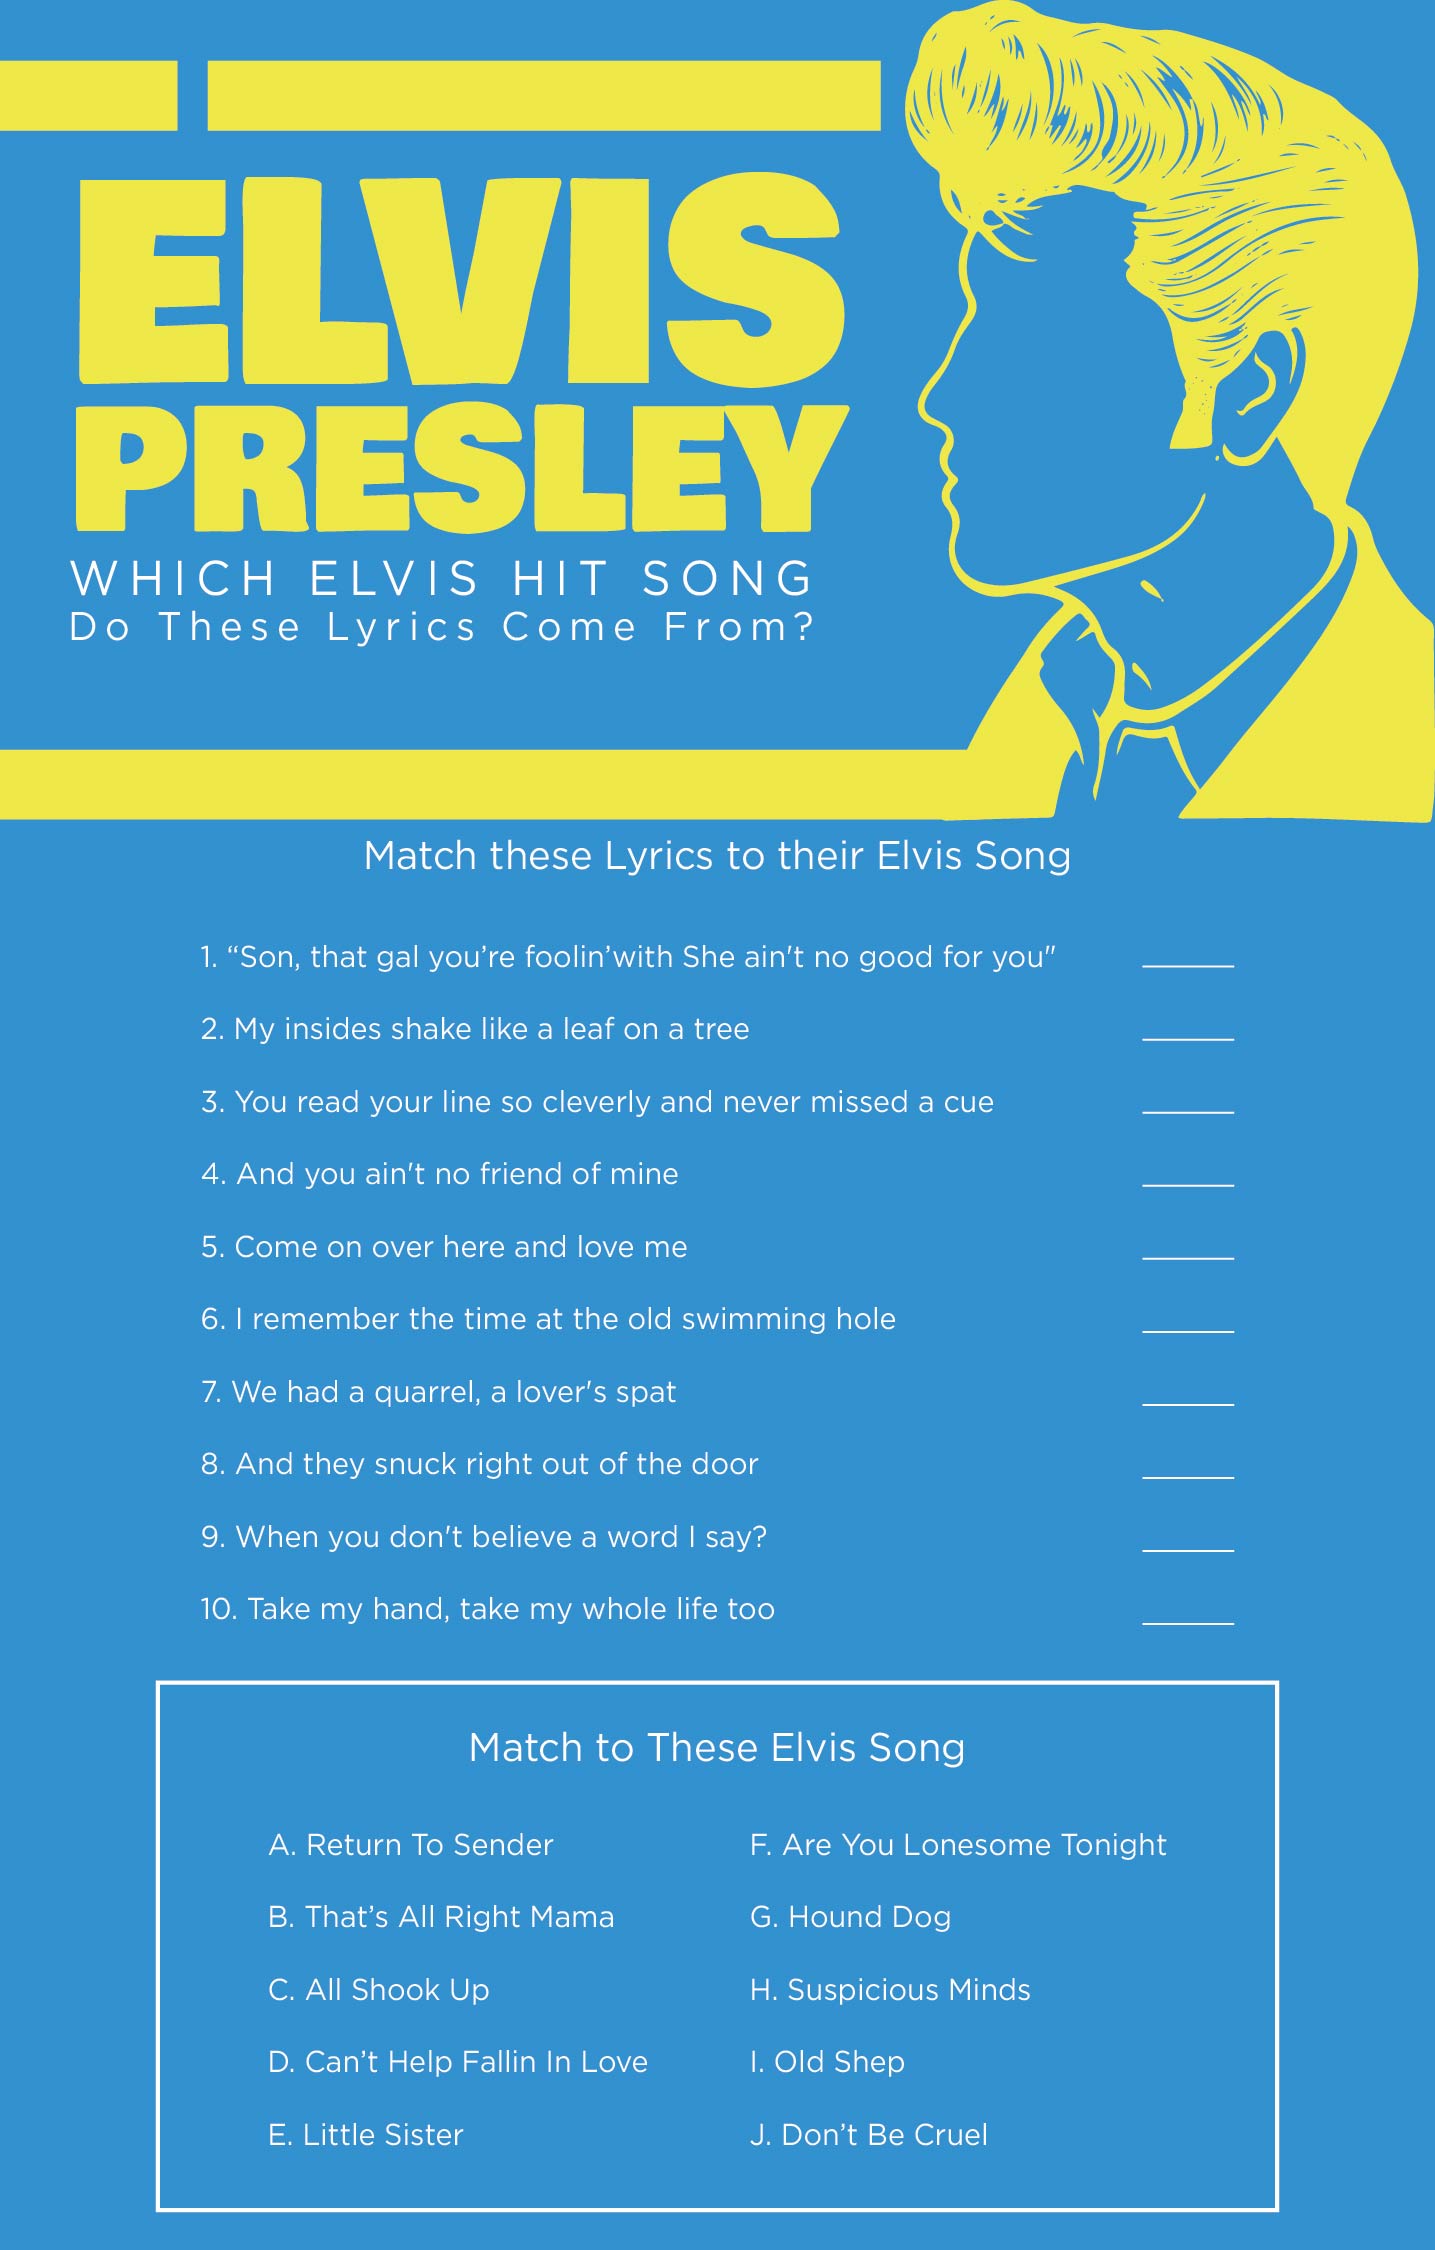 Printable Elvis Trivia Questions and Answers